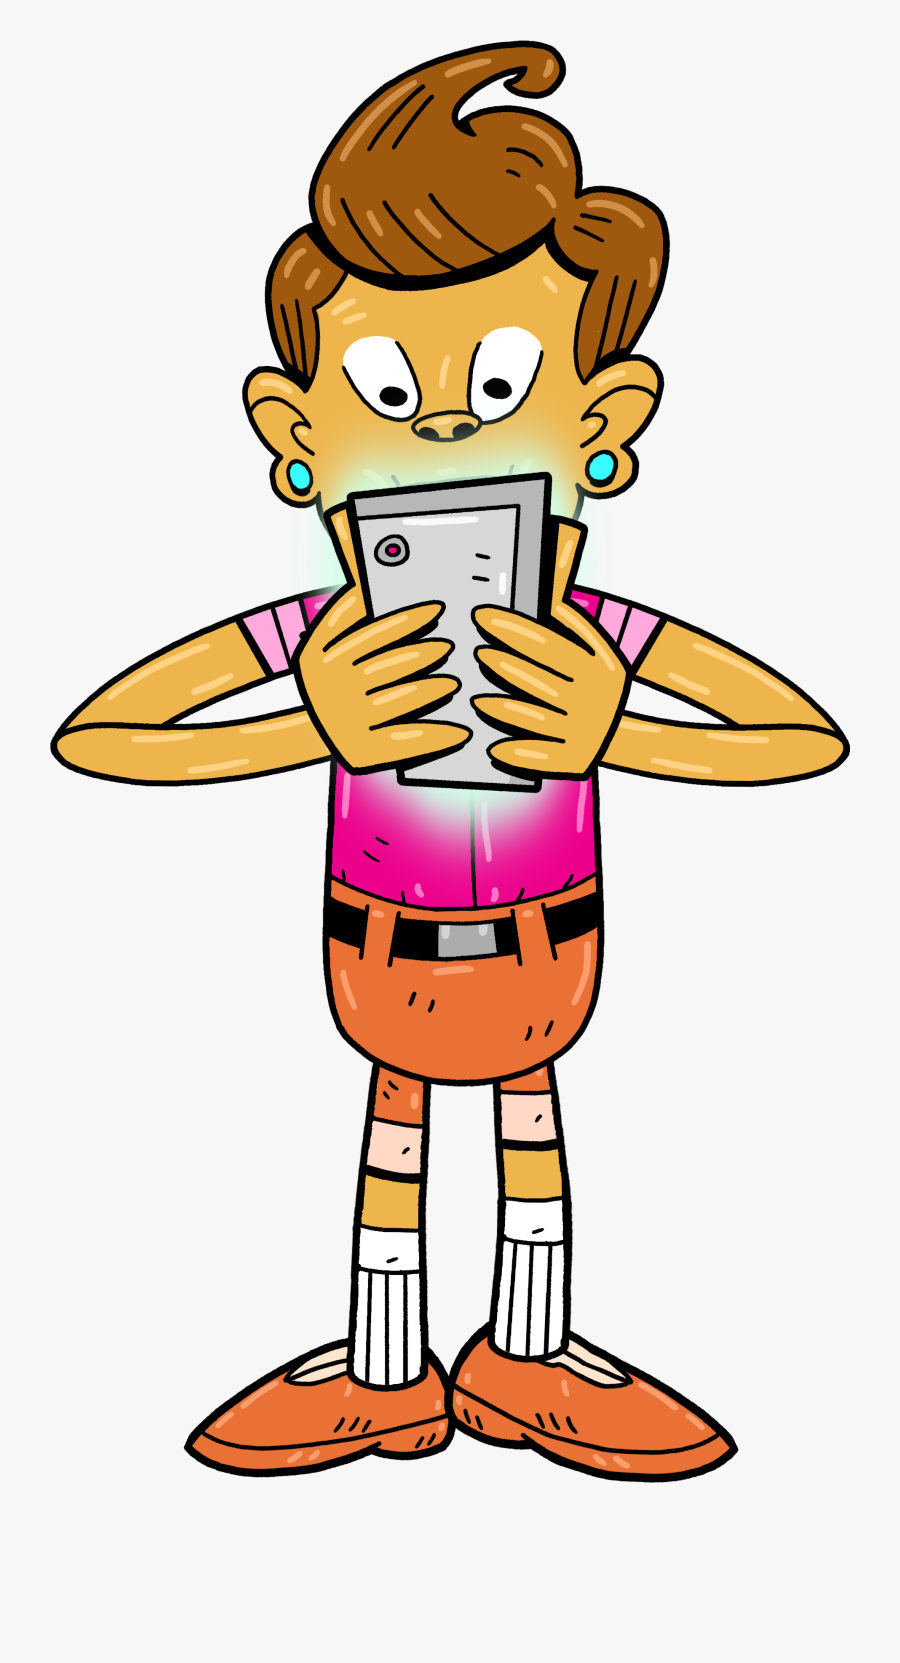 Meet The New Earthlings Coming To Toejam & Earl - Person Texting Clip Art Png, Transparent Clipart